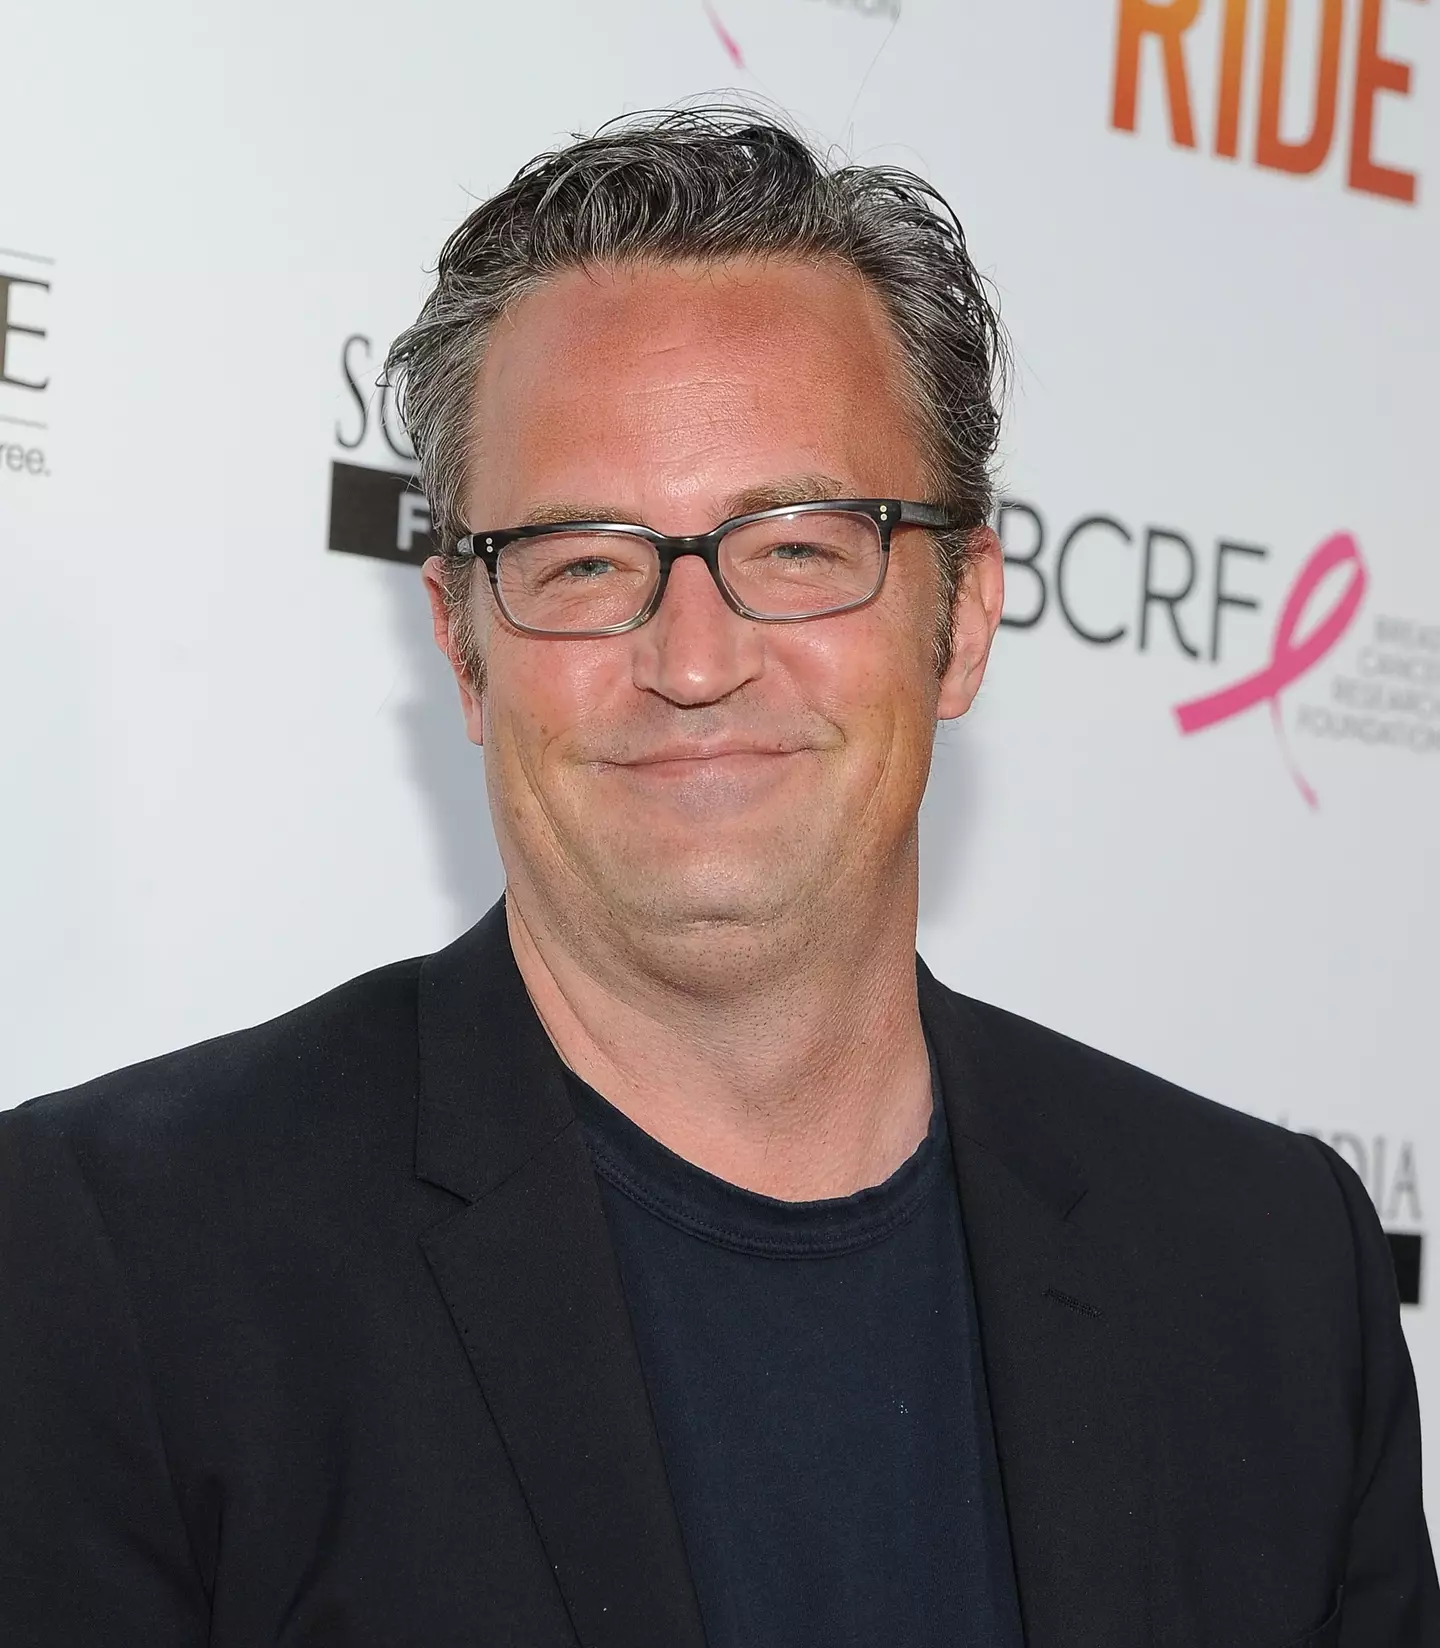 Friends fans are heartbroken at the news of Matthew Perry's passing.